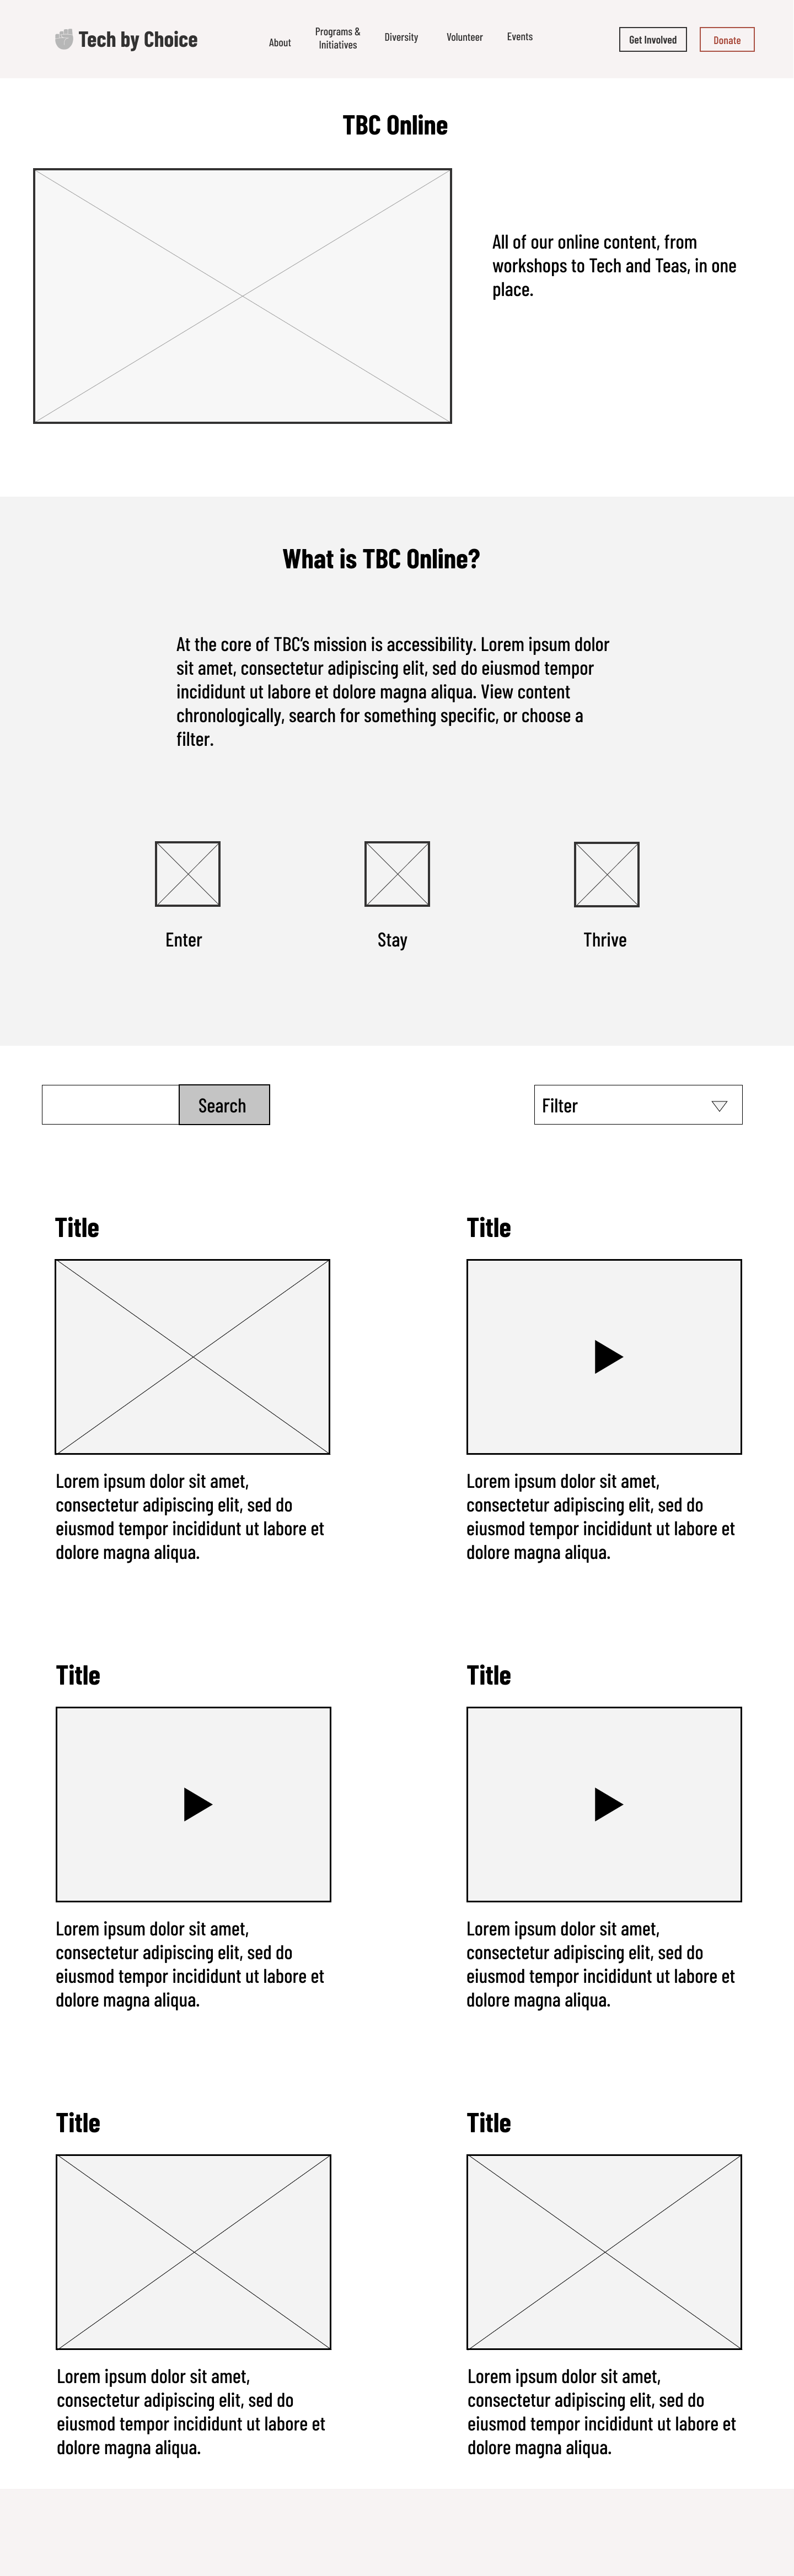 Gray and white wireframe for TBC online page.